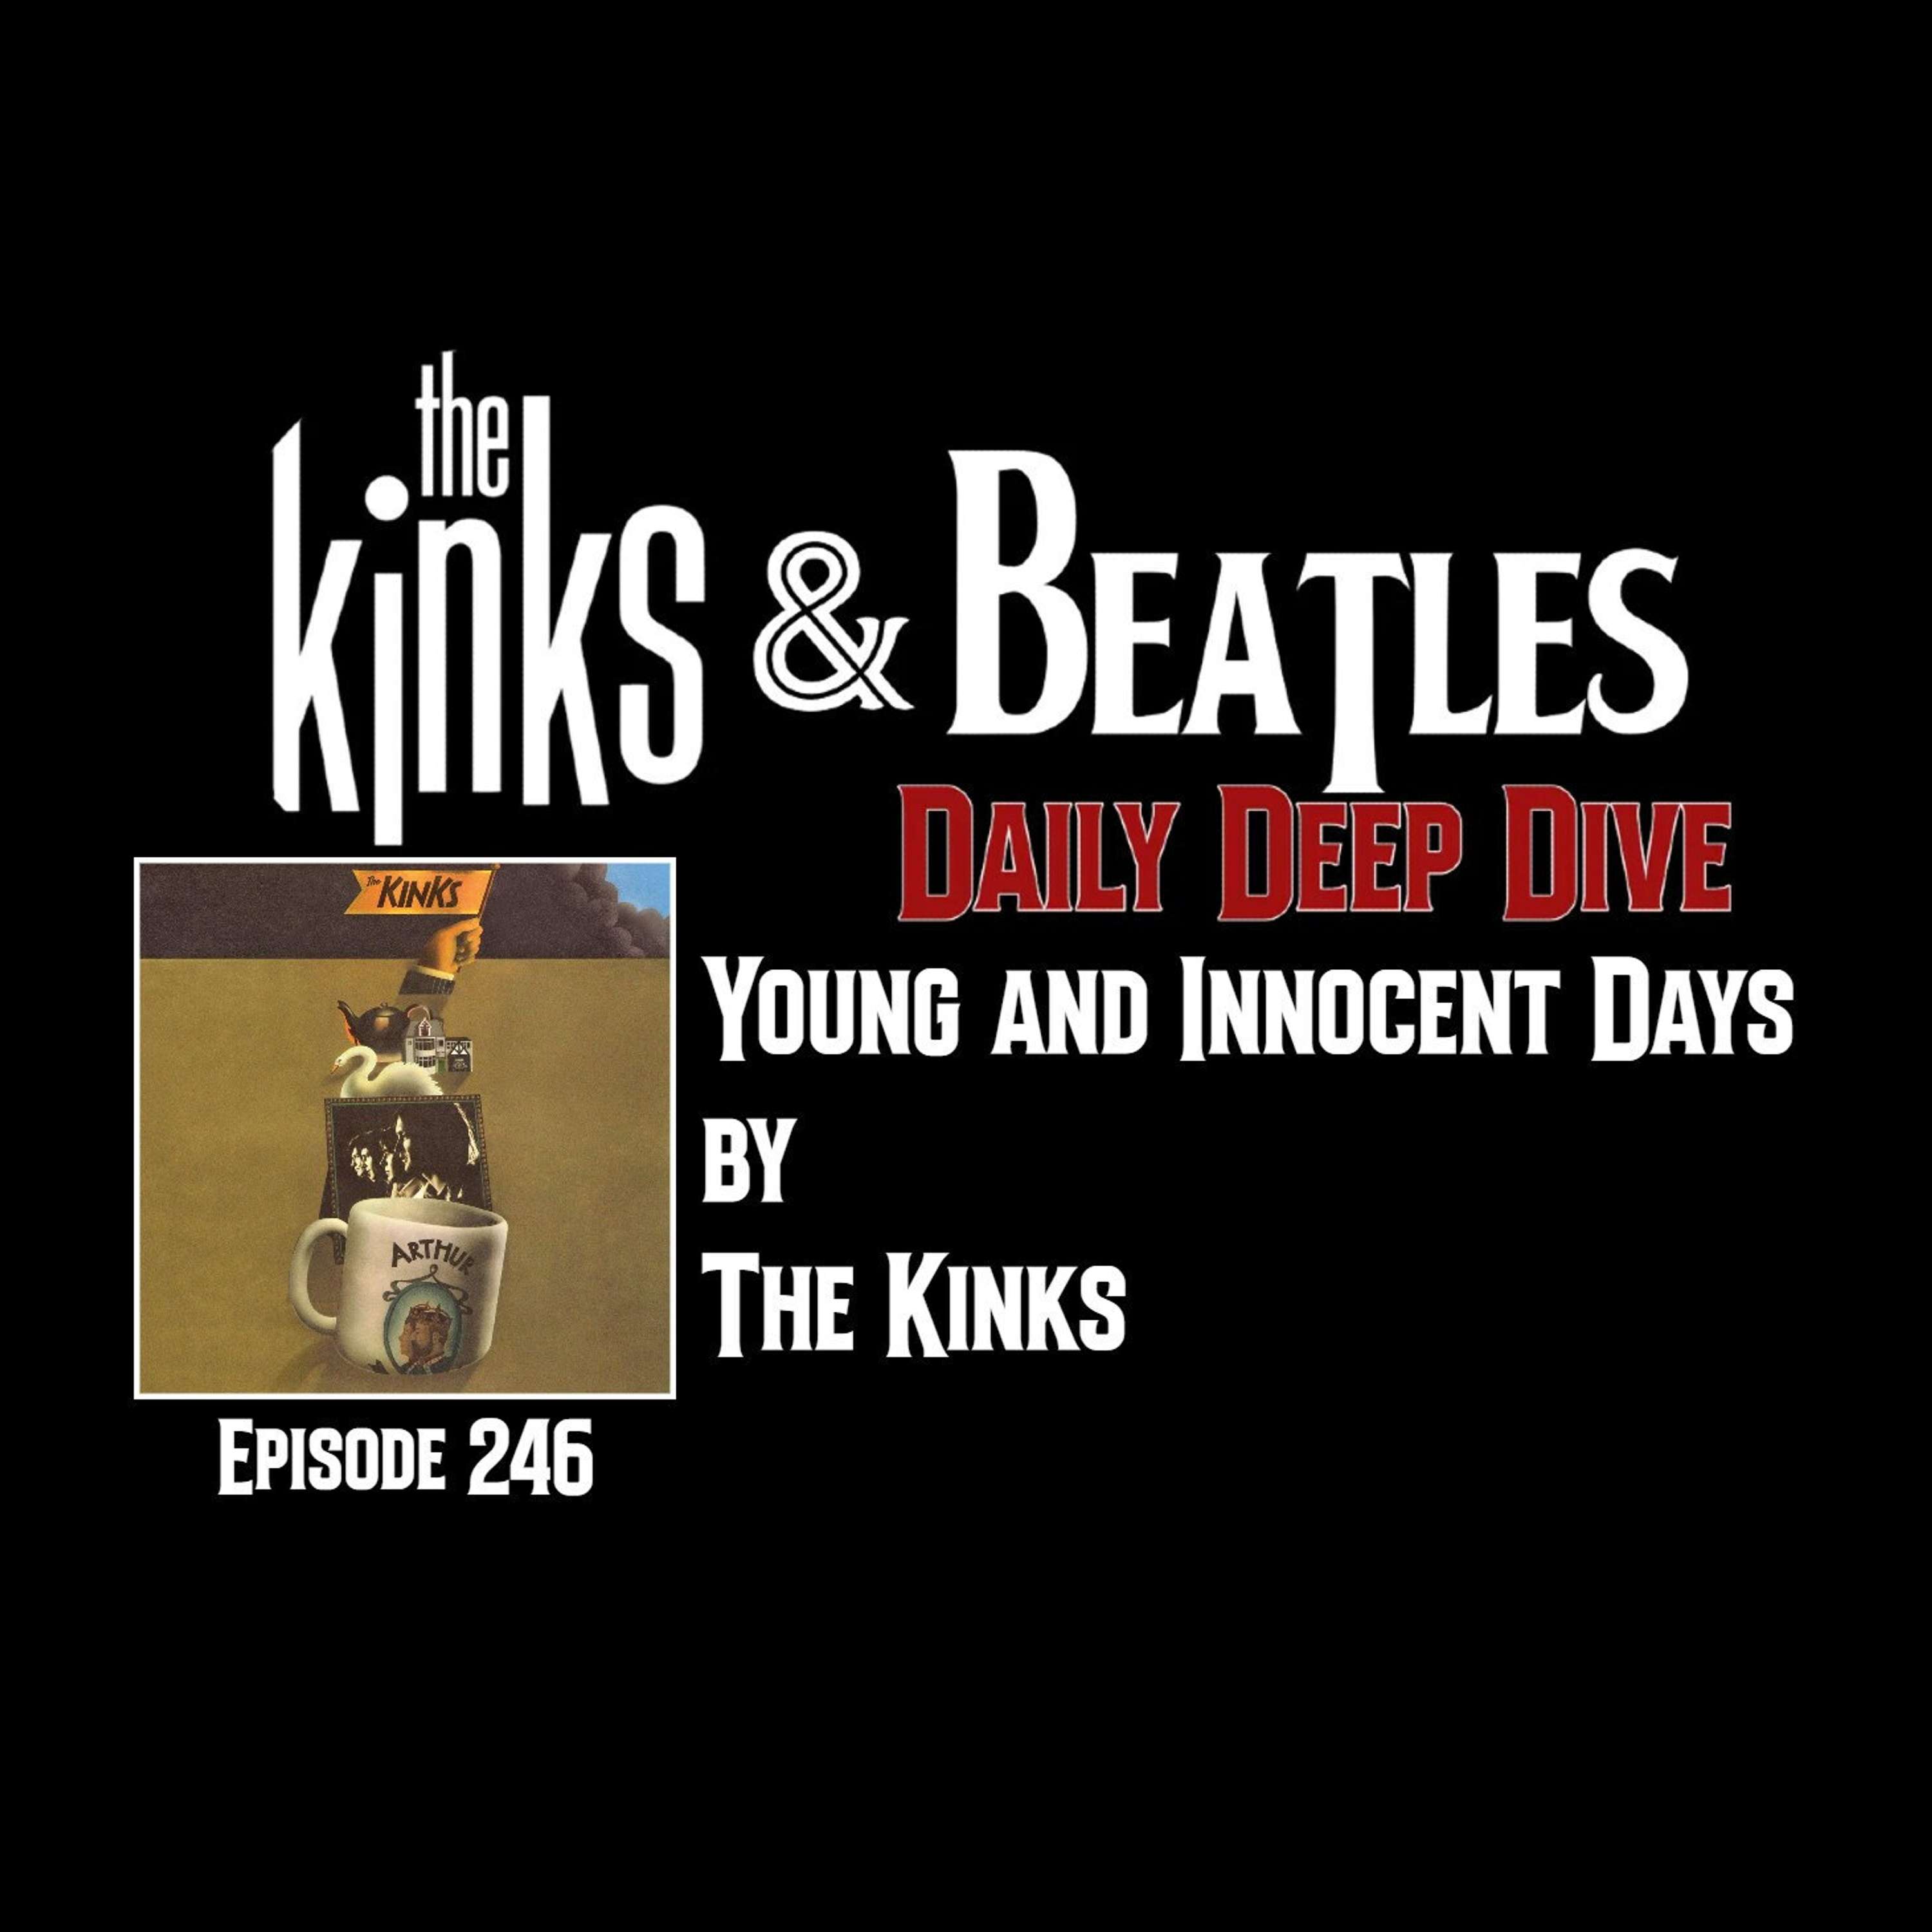 Young and Innocent Days by The Kinks